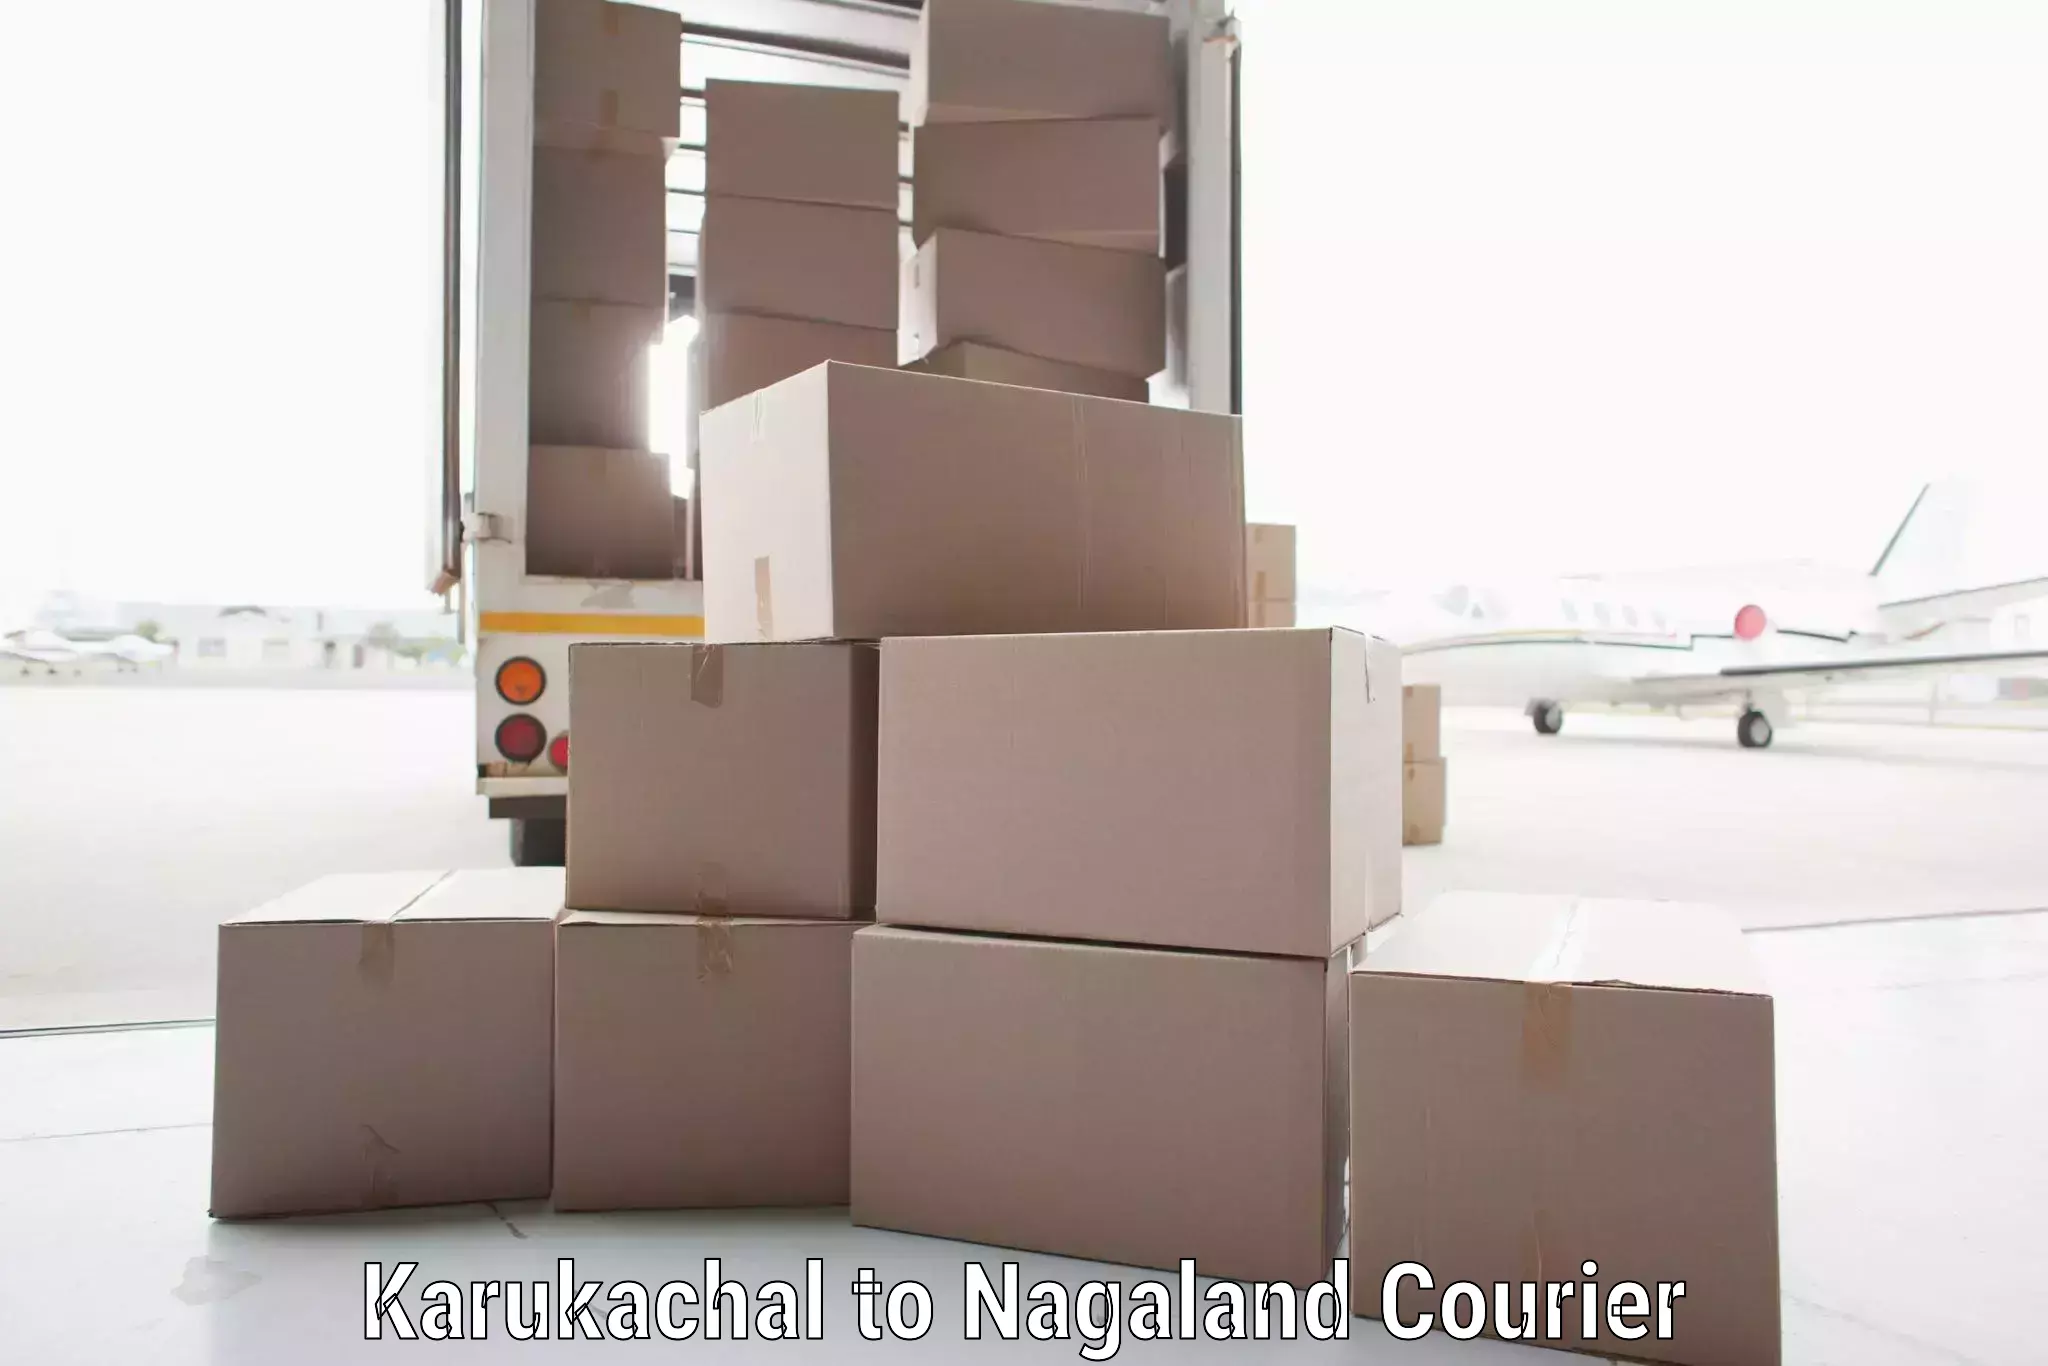 High-priority parcel service Karukachal to Nagaland